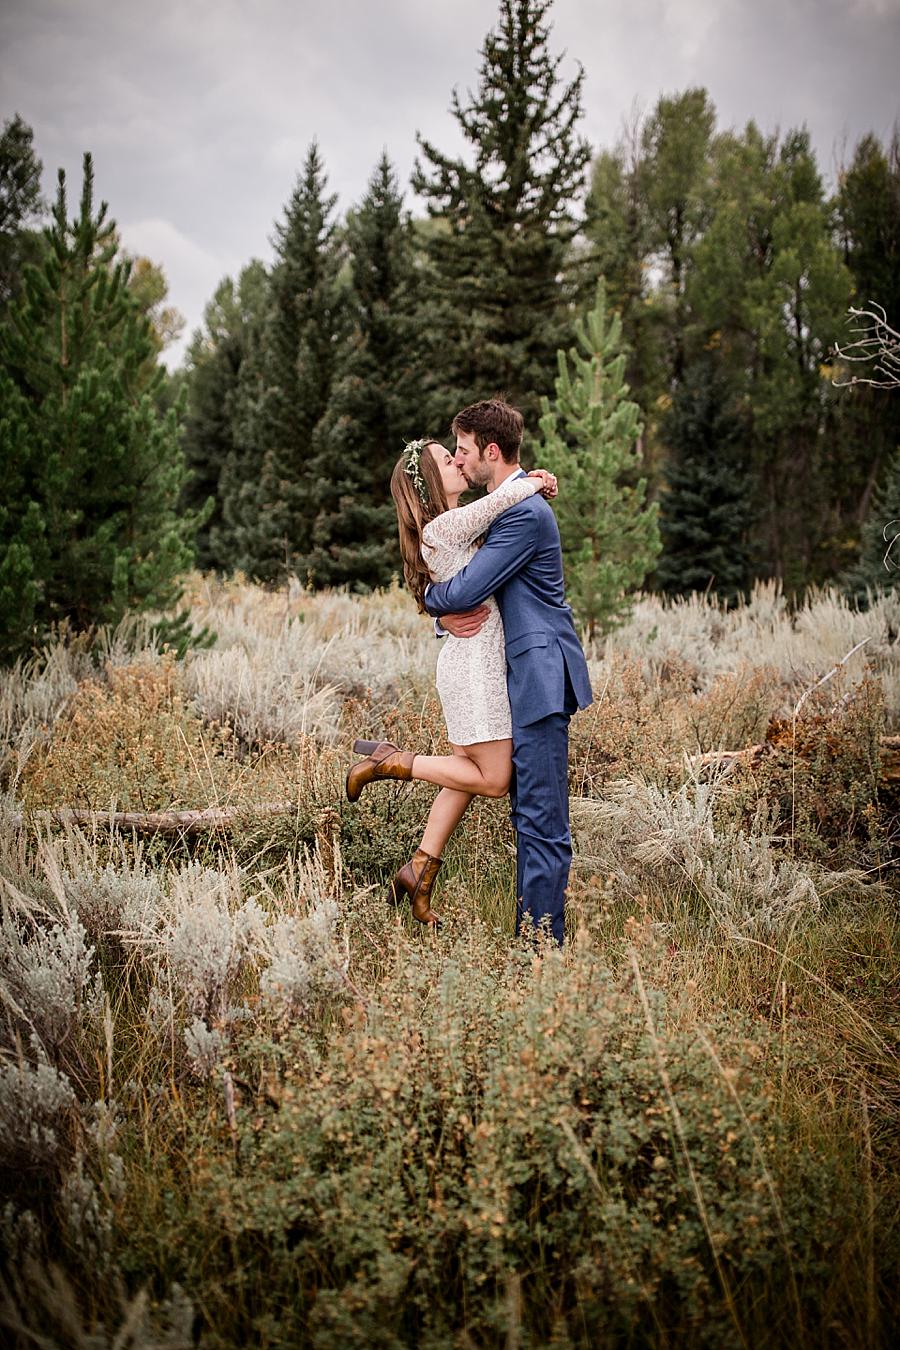 Picking her up and kissing her at this Grand Tetons Destination Wedding by Knoxville Wedding Photographer, Amanda May Photos.